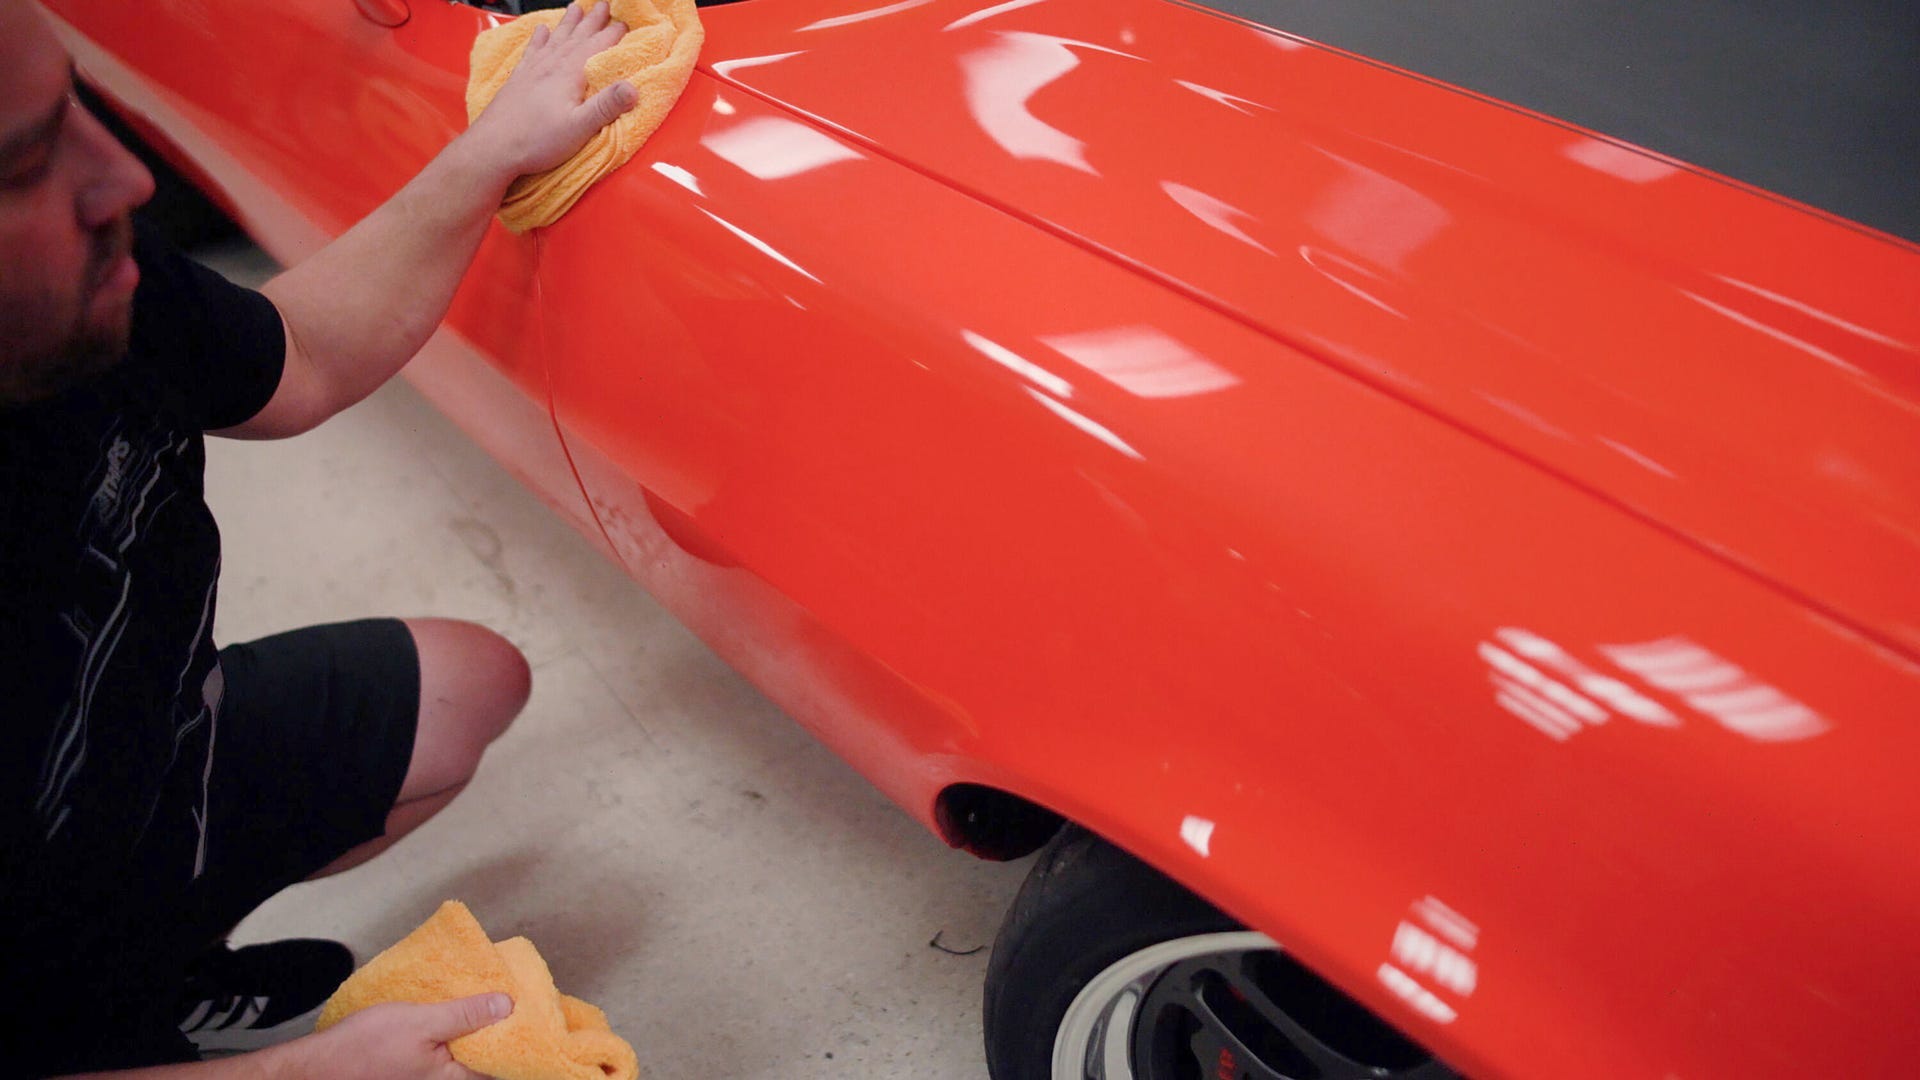 Mothers Ceramic Detailer being applied to a red classic car